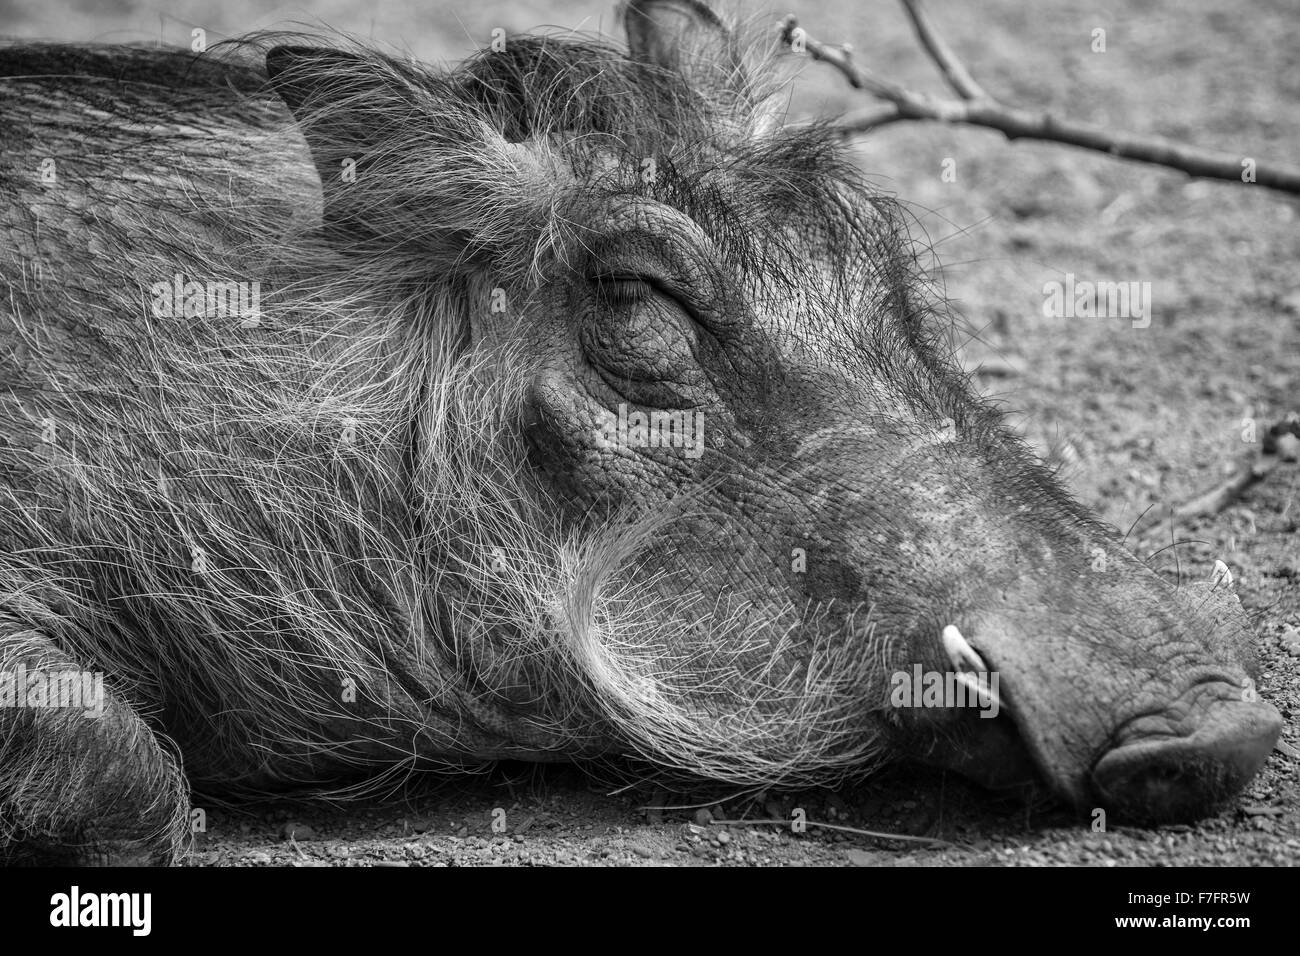 A black and white portrait of a resting warthog at the Indianapolis zoo. Stock Photo